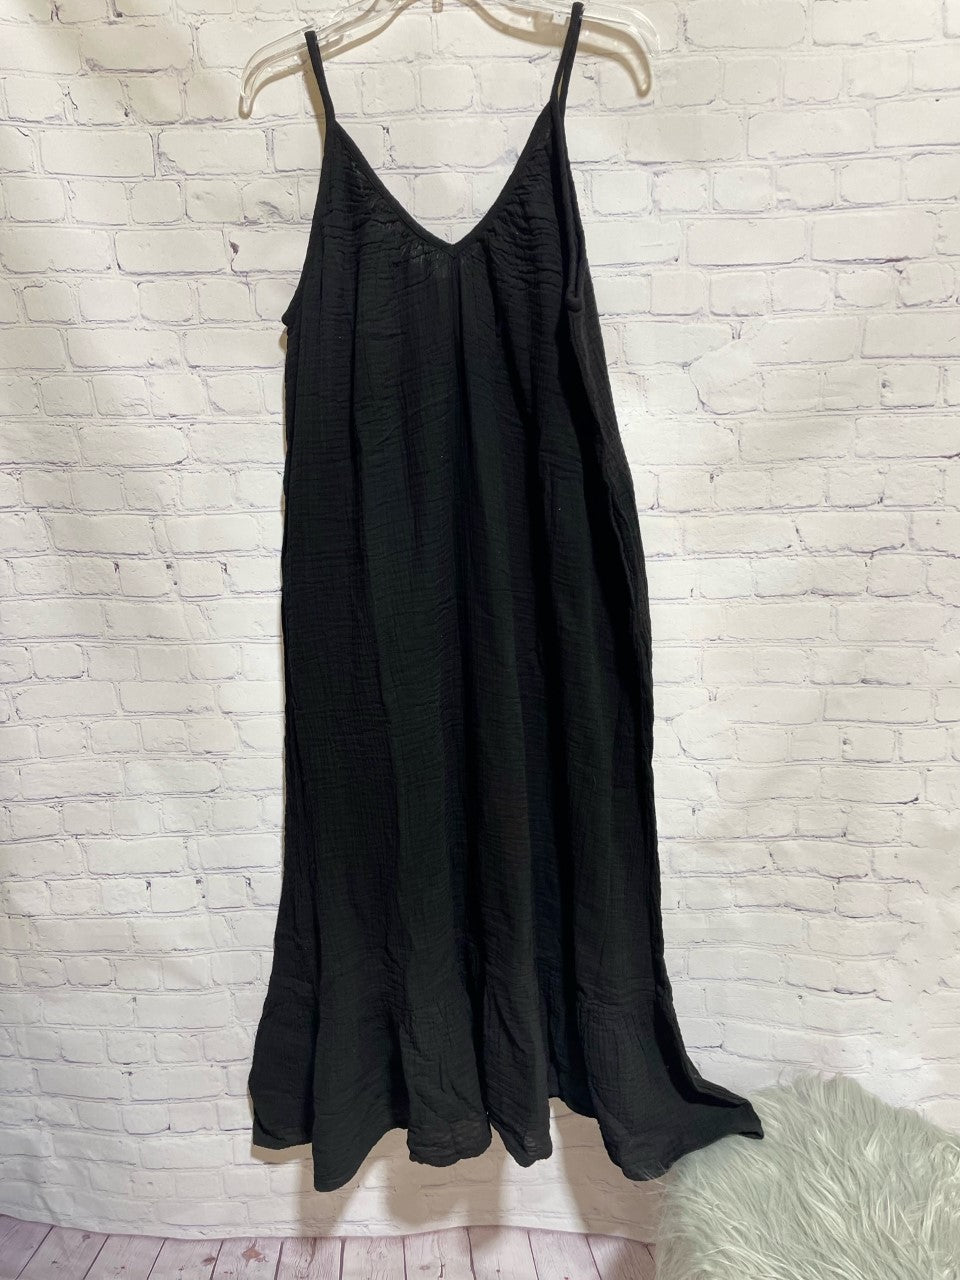 The Shannon Passero Kara Dress is perfect for a relaxed, boho-chic look. Its oversized silhouette and flirty spaghetti straps show off your femininity with a V neck, while the frill hem adds a fun and flirty touch. Get ready to sail away in style!       998